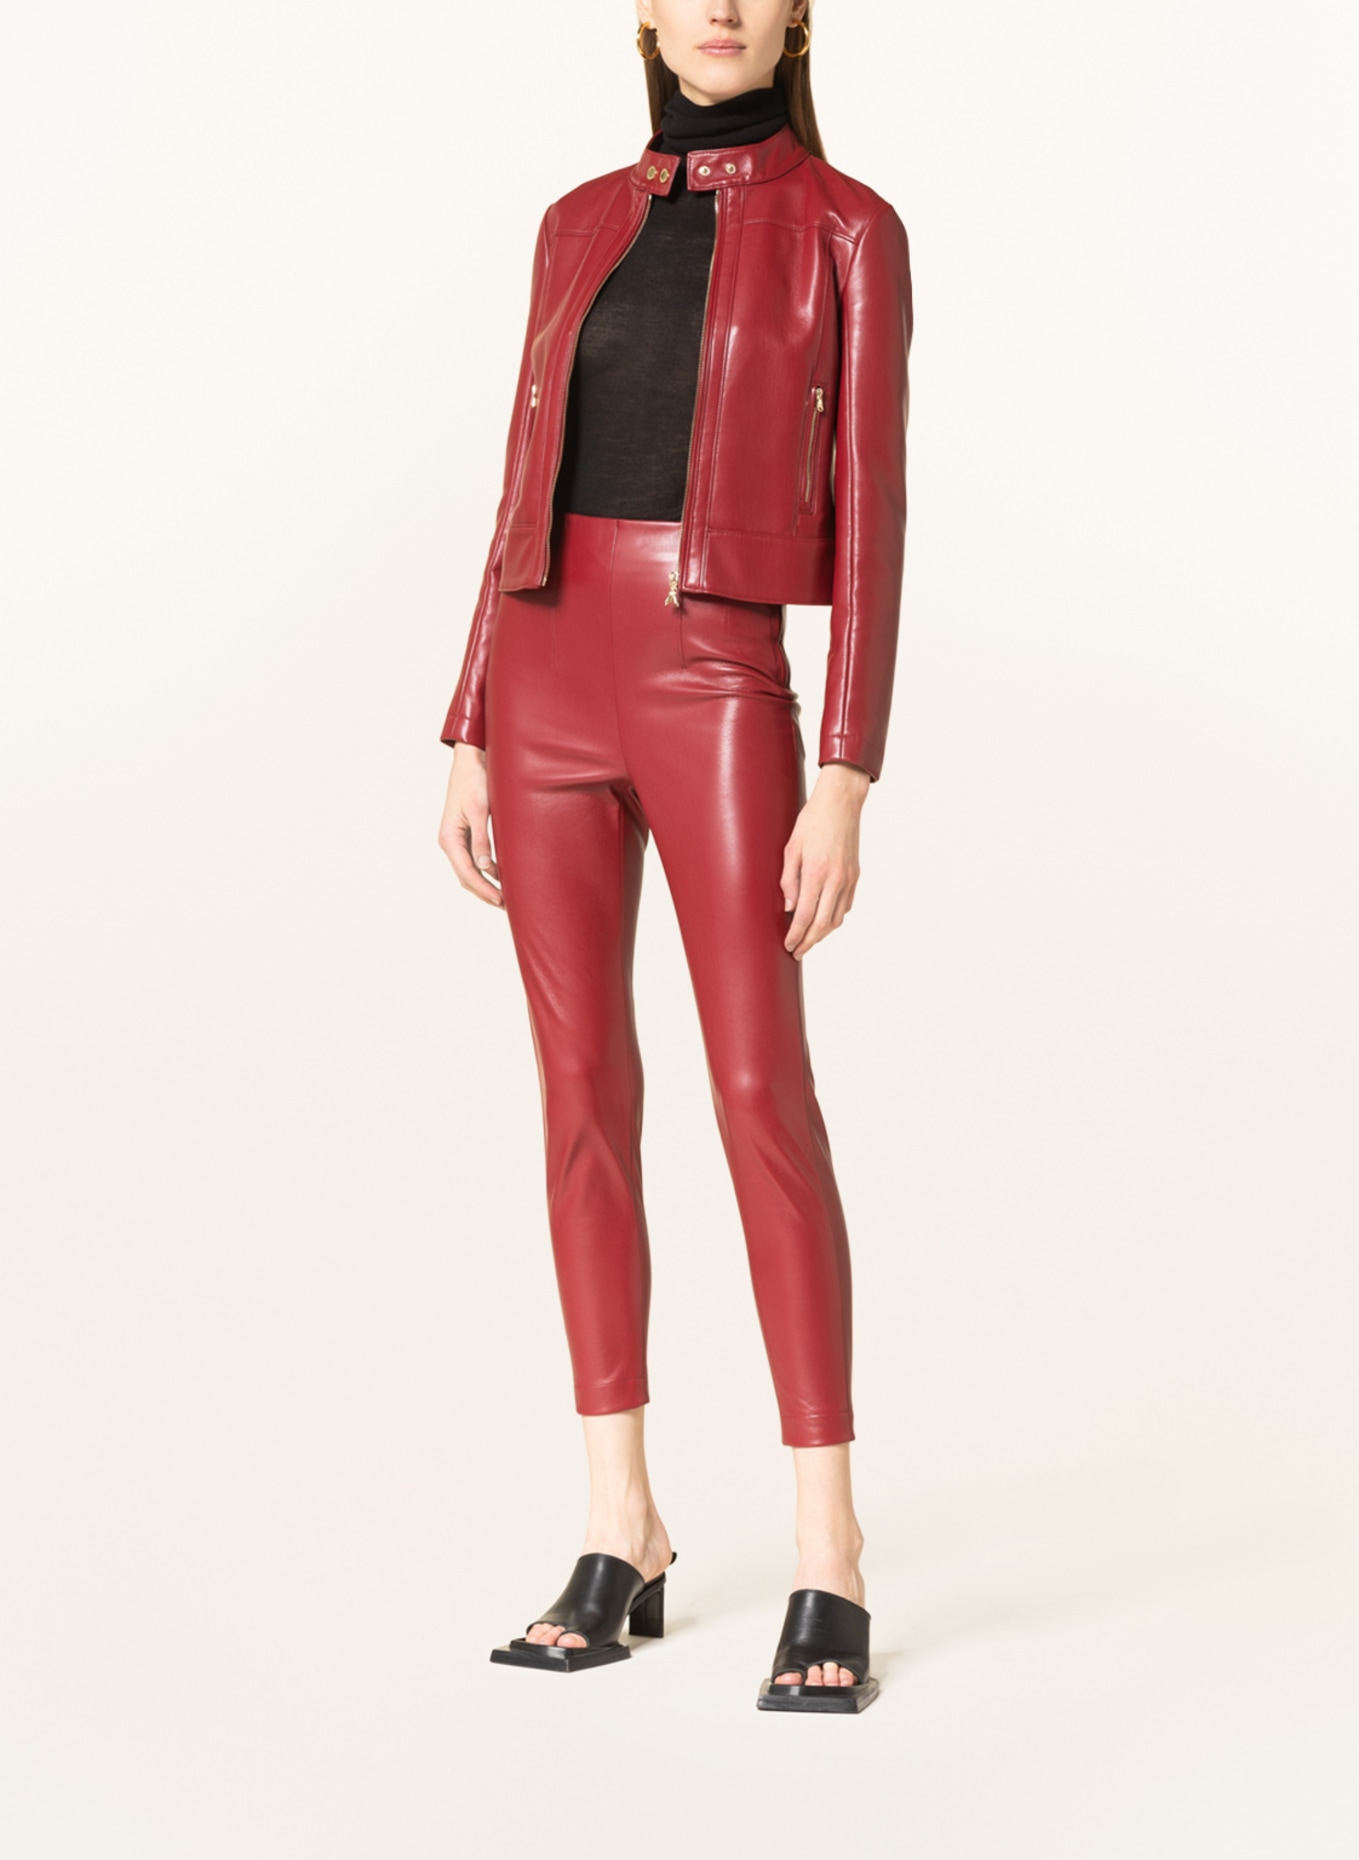 SEASUM Leather Pants for Women Faux Leather Leggings Sexy India | Ubuy